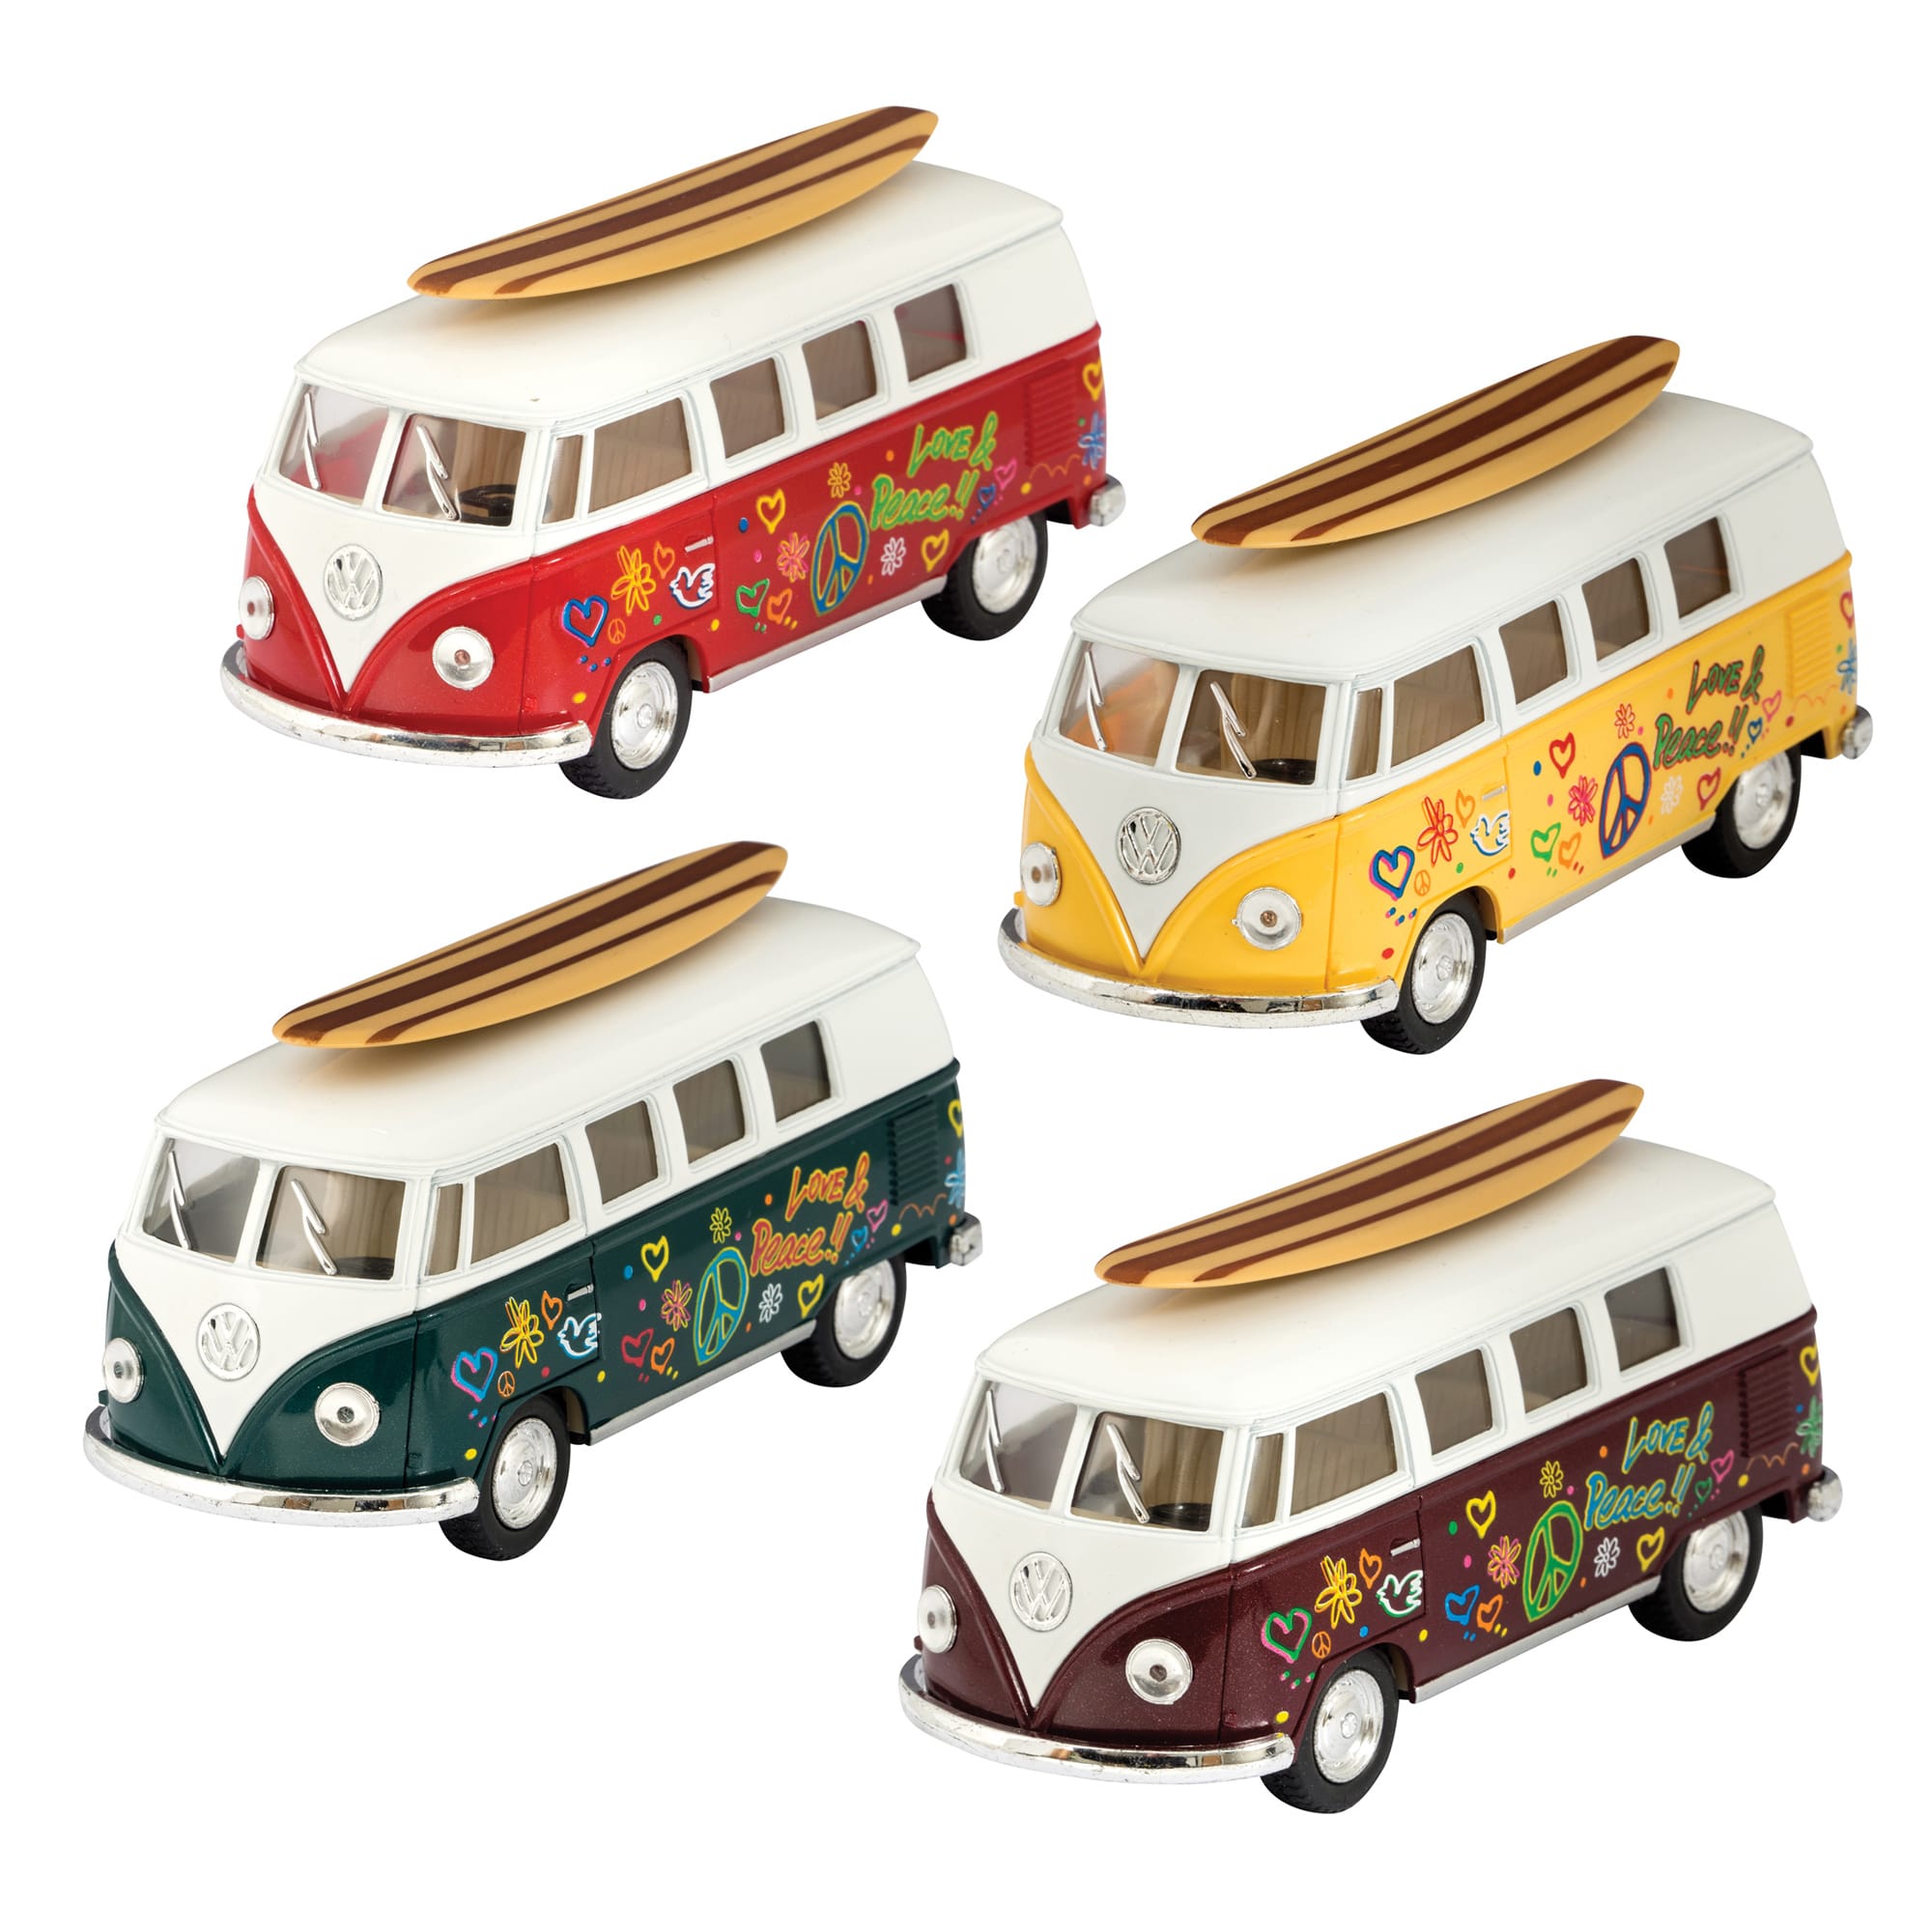 Diecast 1962 VW Bus With Surfboard - Assorted Colors    